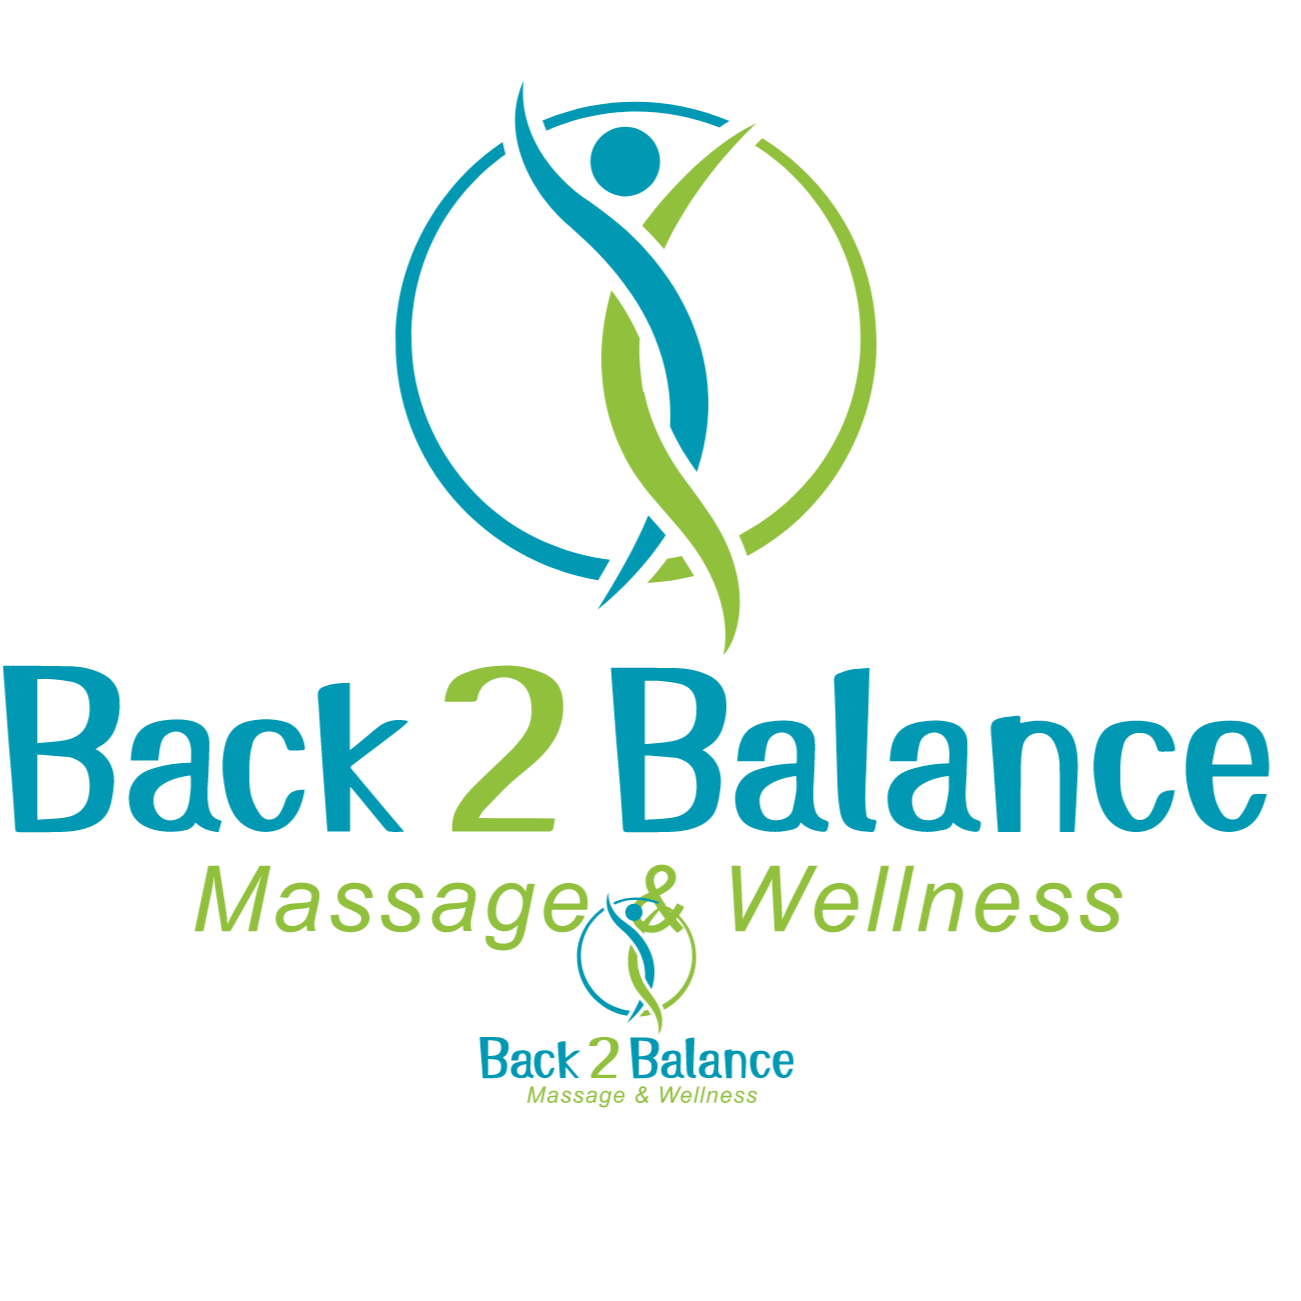 Specializing in Medical, and Deep Tissue Massage, focusing on your issues to get you back to your li Back 2 Balance Massage & Wellness Port Orange (386)898-4967